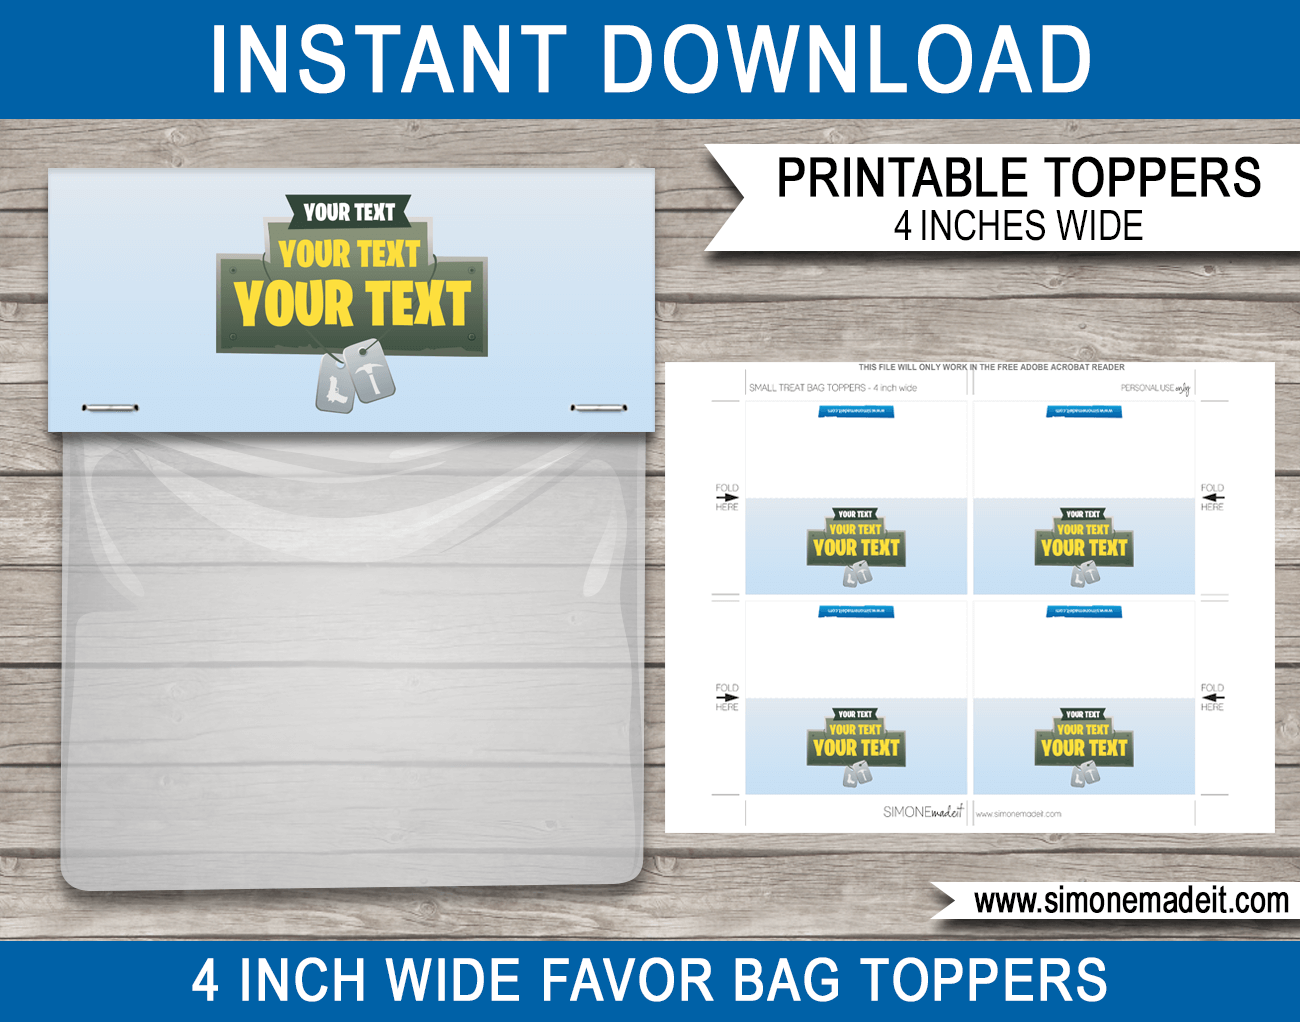 Fortnite Party Favor Bag Toppers | Fortnite Birthday Party Favors | DIY Editable and Printable Template | INSTANT DOWNLOAD via SIMONEmadeit.com